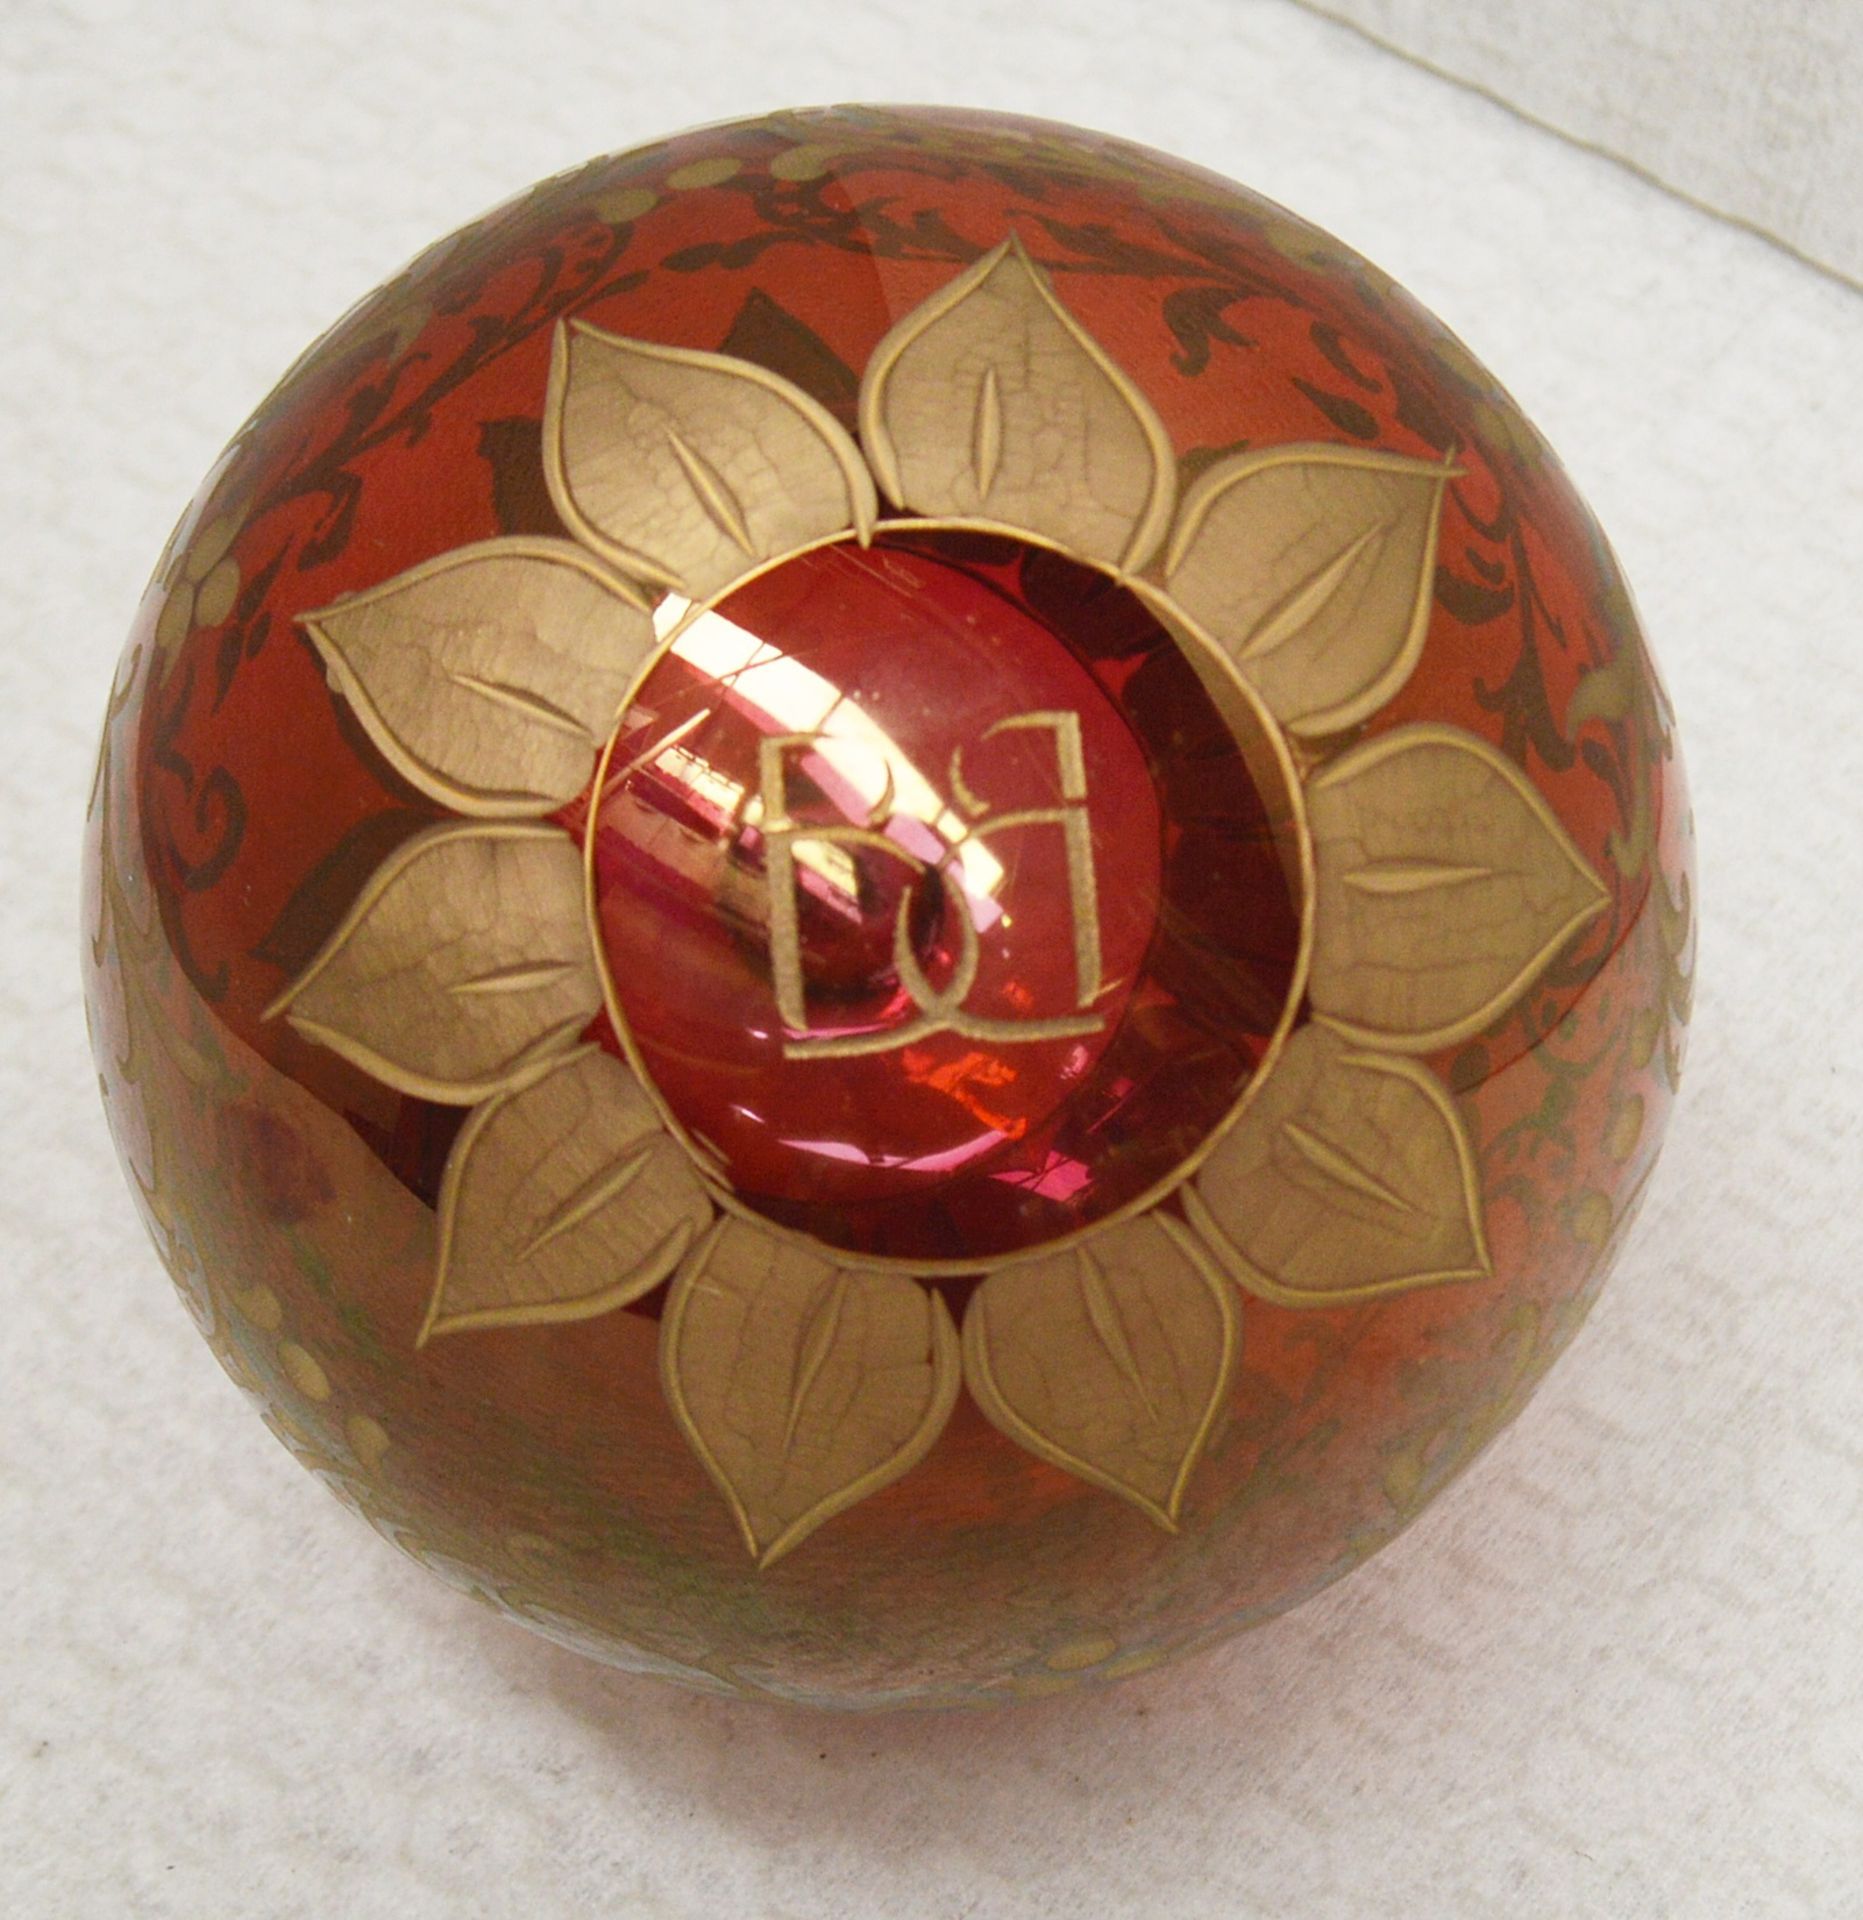 1 x BALDI 'Home Jewels' Italian Hand-crafted Artisan Glass Christmas Tree Decoration In Red With - Image 4 of 4